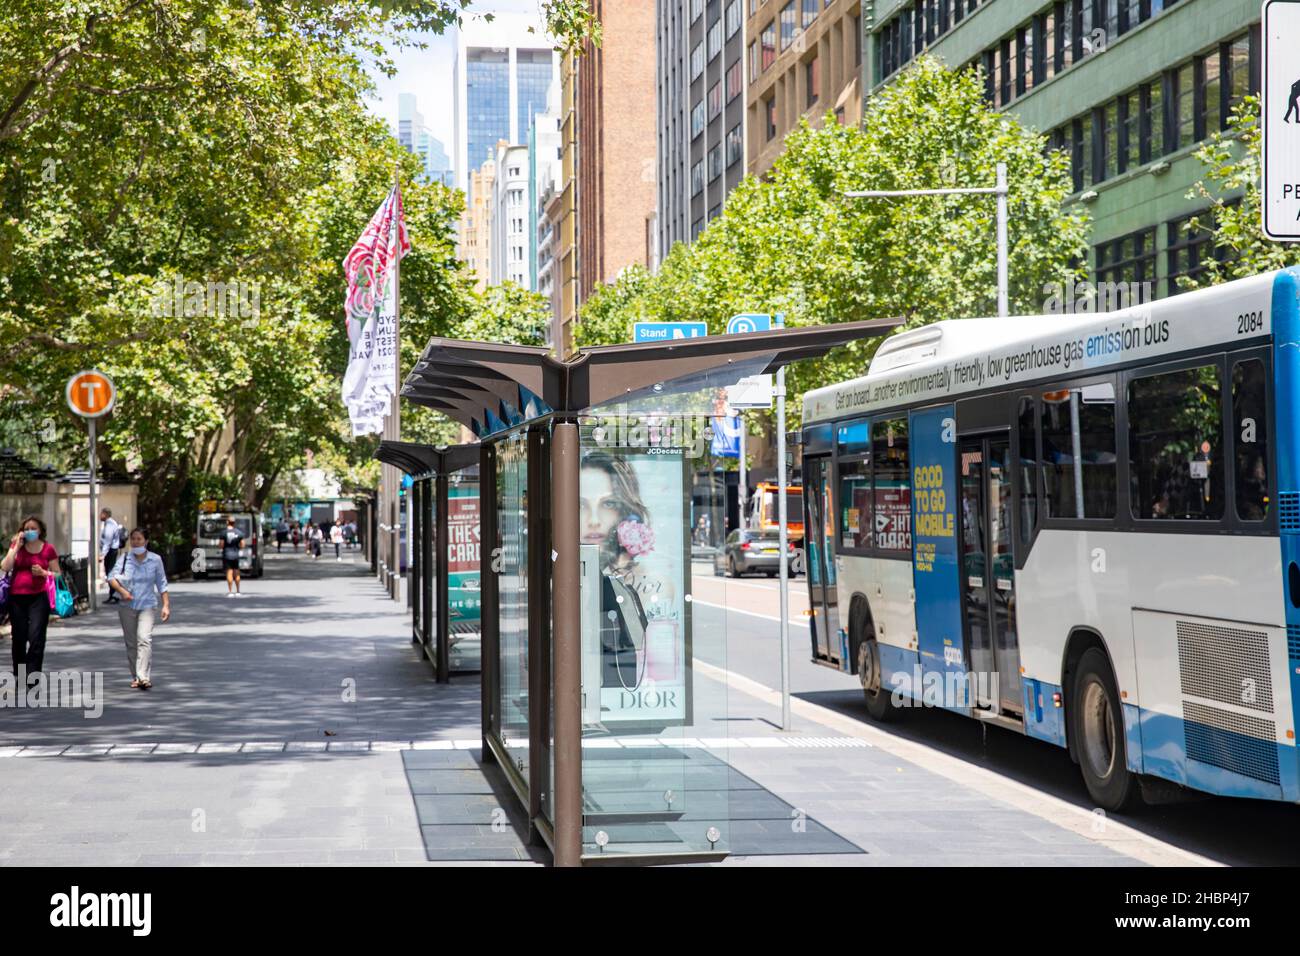 Sydney bus at a bus stand in York street Sydney city centre, with advertising on the bus stand,Sydney city centre,Australia Stock Photo